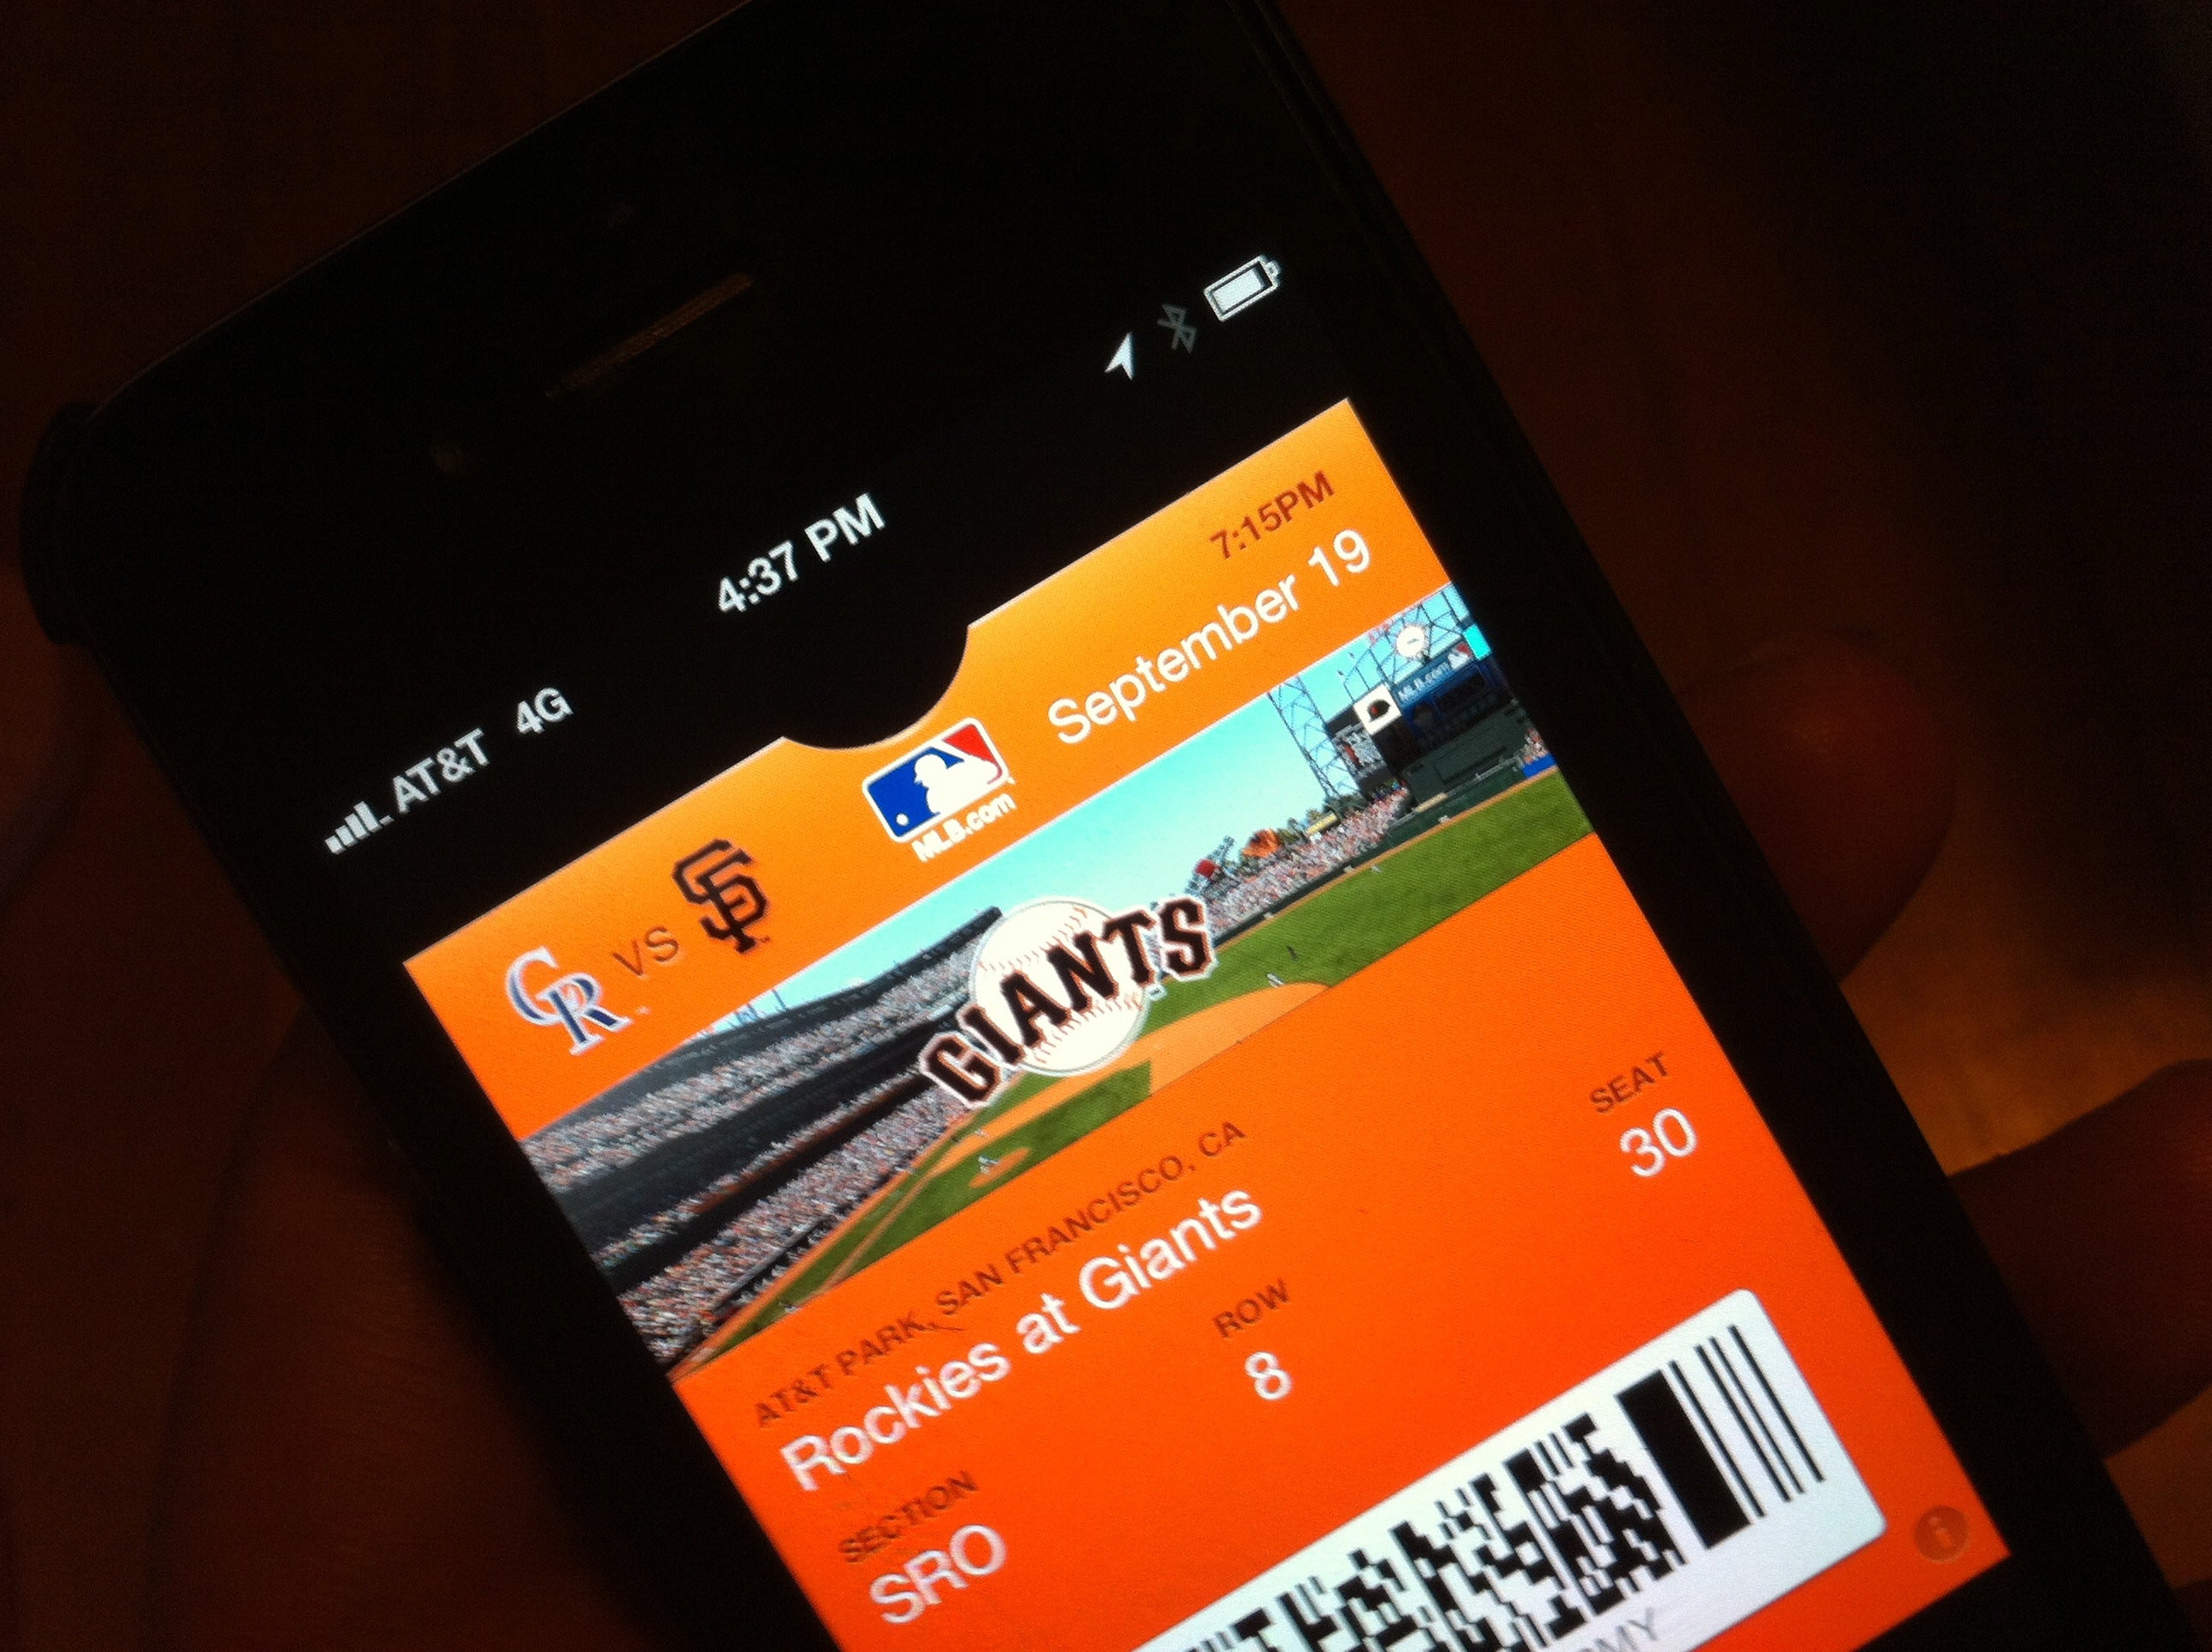 A Passbook ticket to a San Francisco Giants game - Major League Baseball testing Passbook as virtual replacement to physical tickets